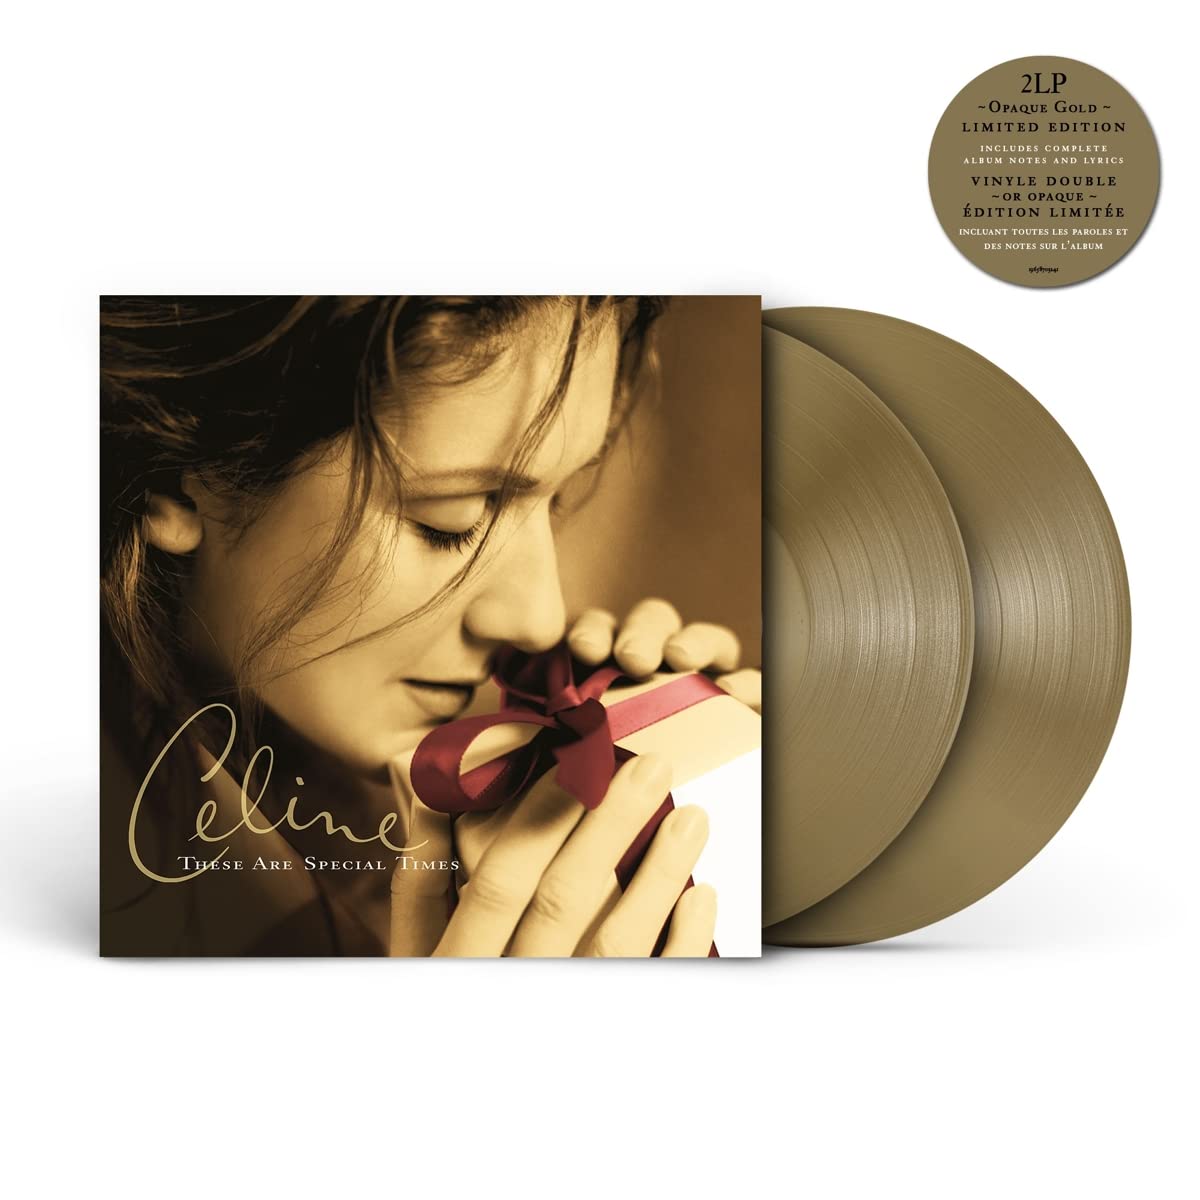 Celine Dion These Are Special Times Limited Gold Vinyl LP